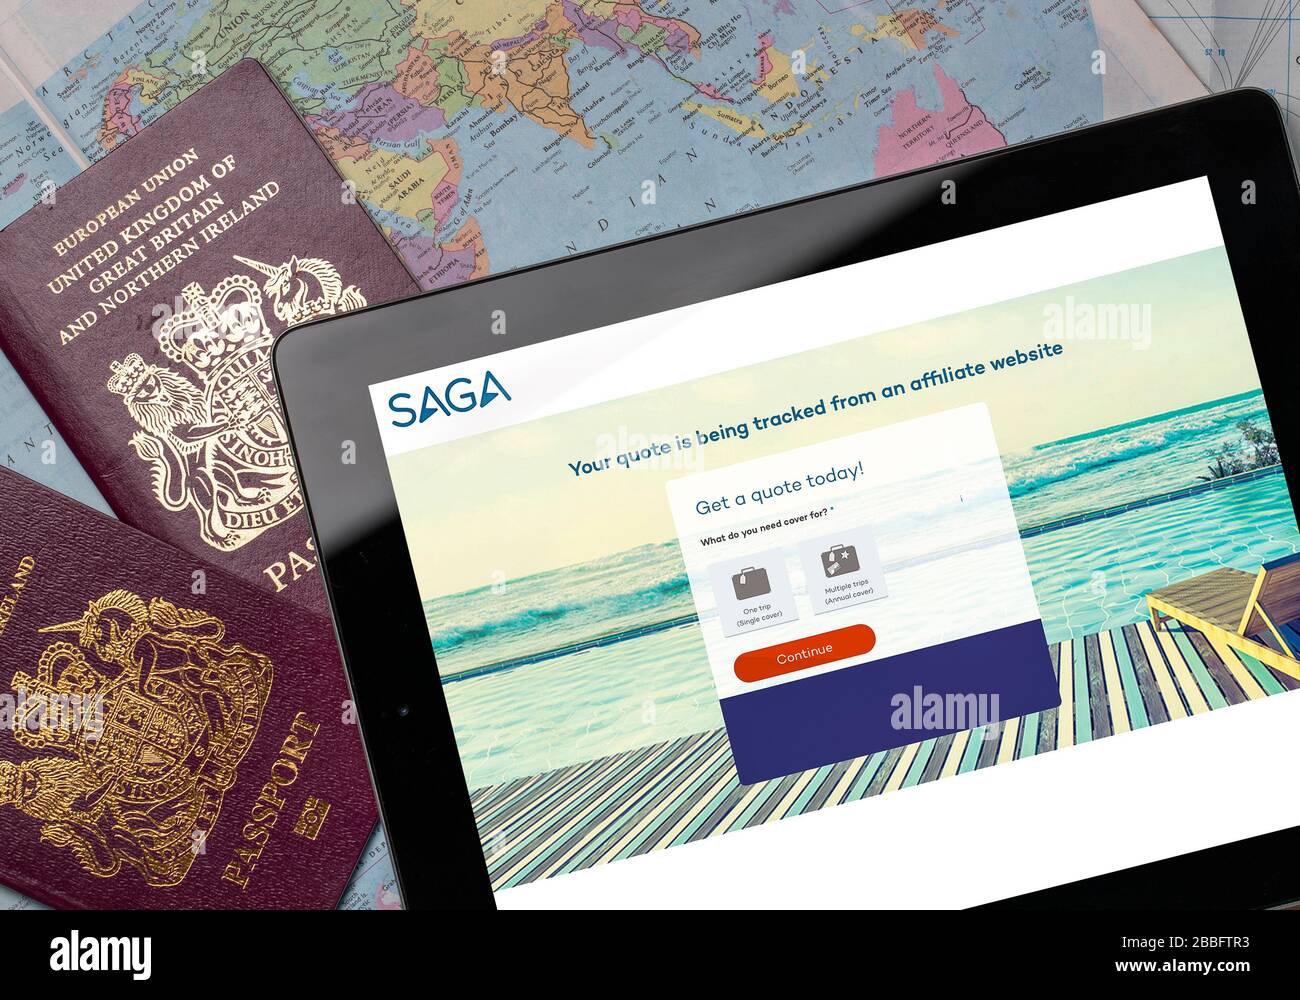 SAGA Travel insurance website on an iPad or tablet. (editorial use only) Stock Photo